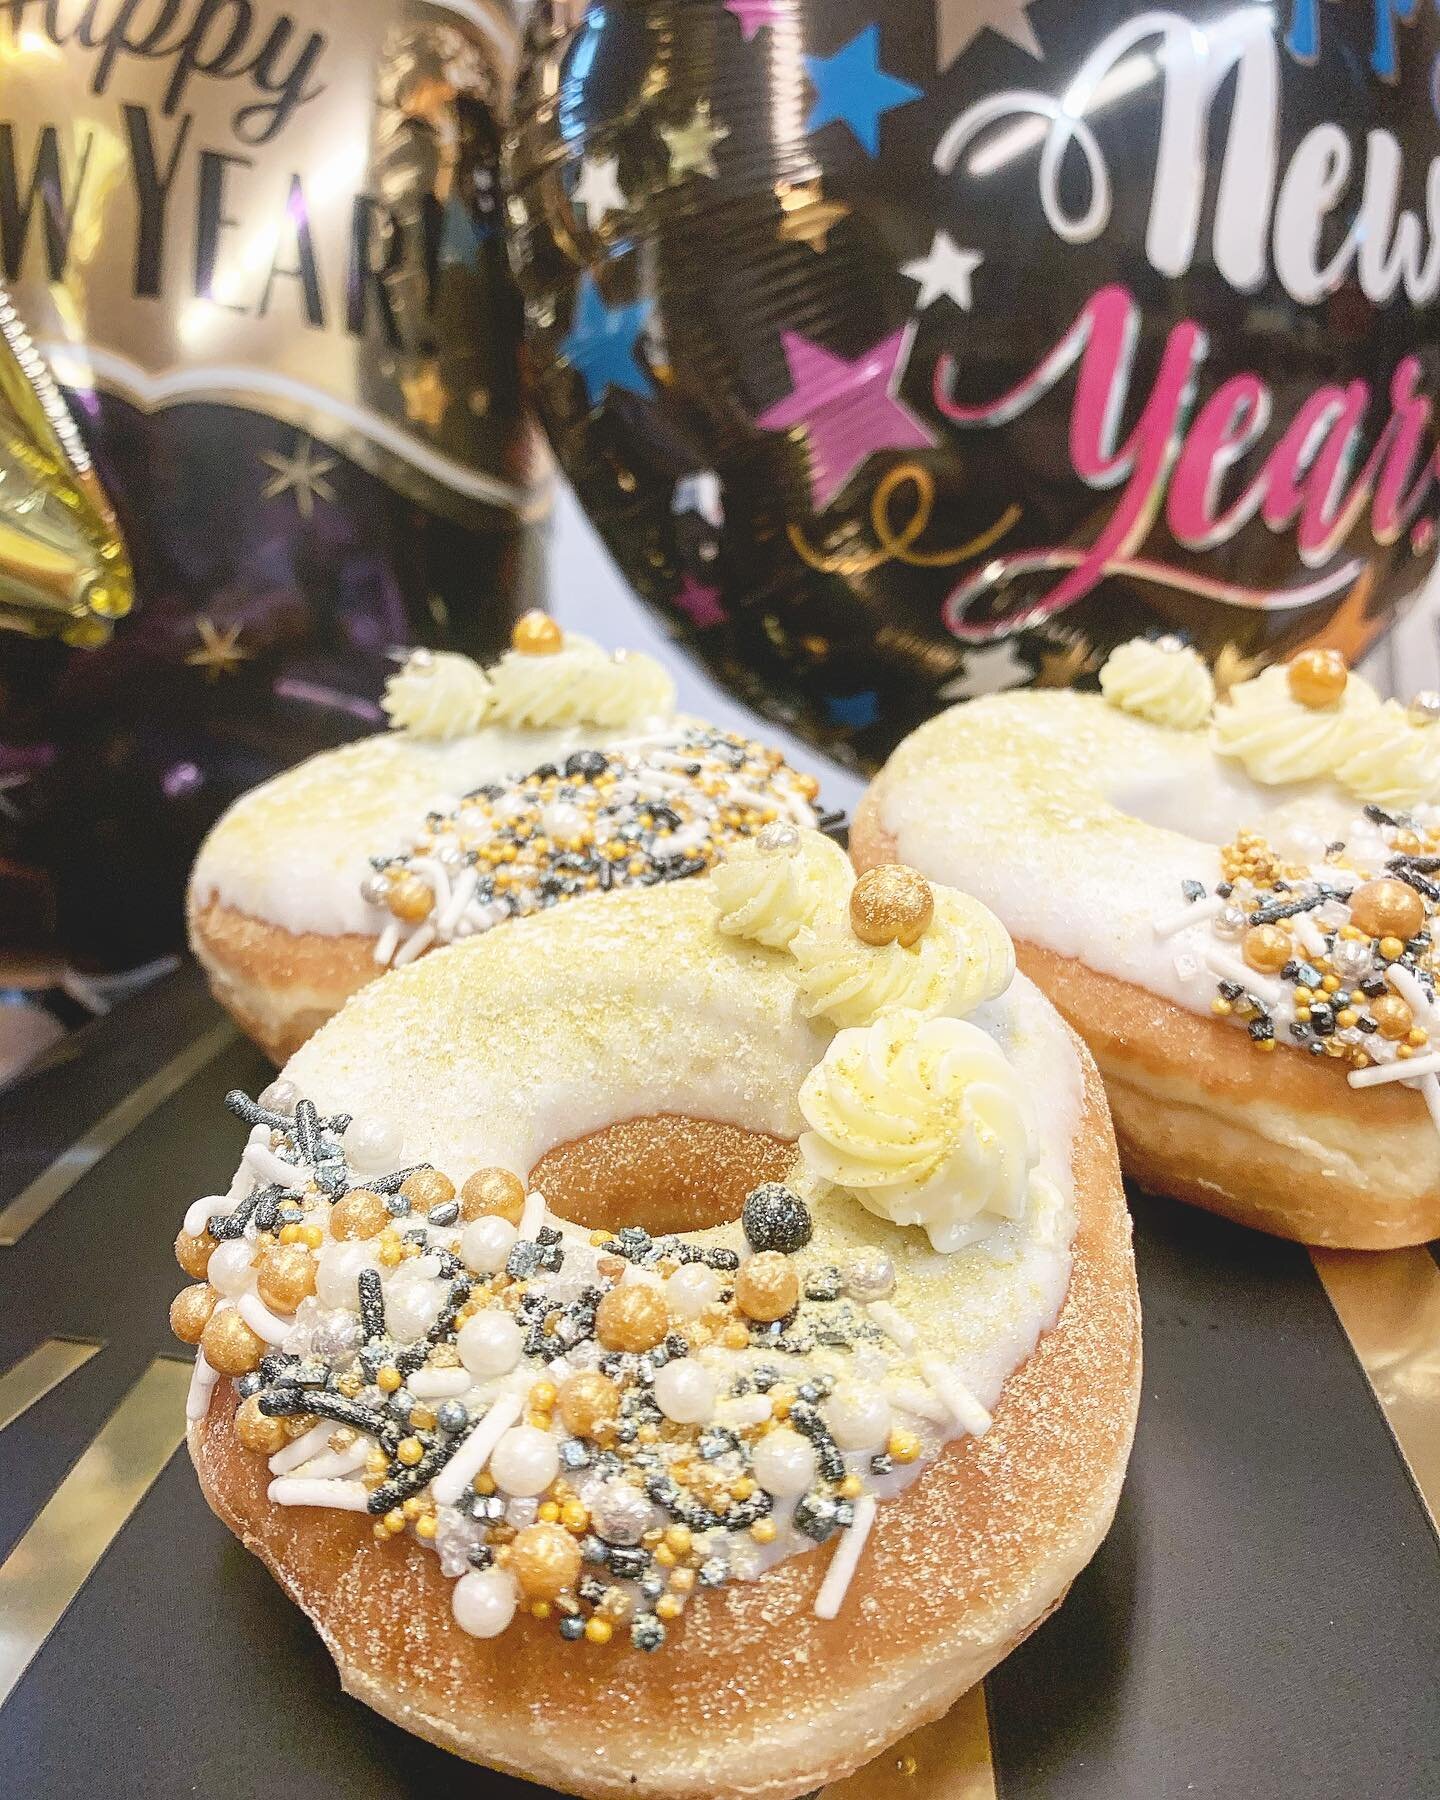 Happy New Years Eve

We dropping this bling on a ring donut today to see out the last of what was a unbelievable year to say the least....

We decided to call this donut:

&ldquo;2020 WON&rdquo; 

What a year! 
Amazing year!
Its in the books!

Could 